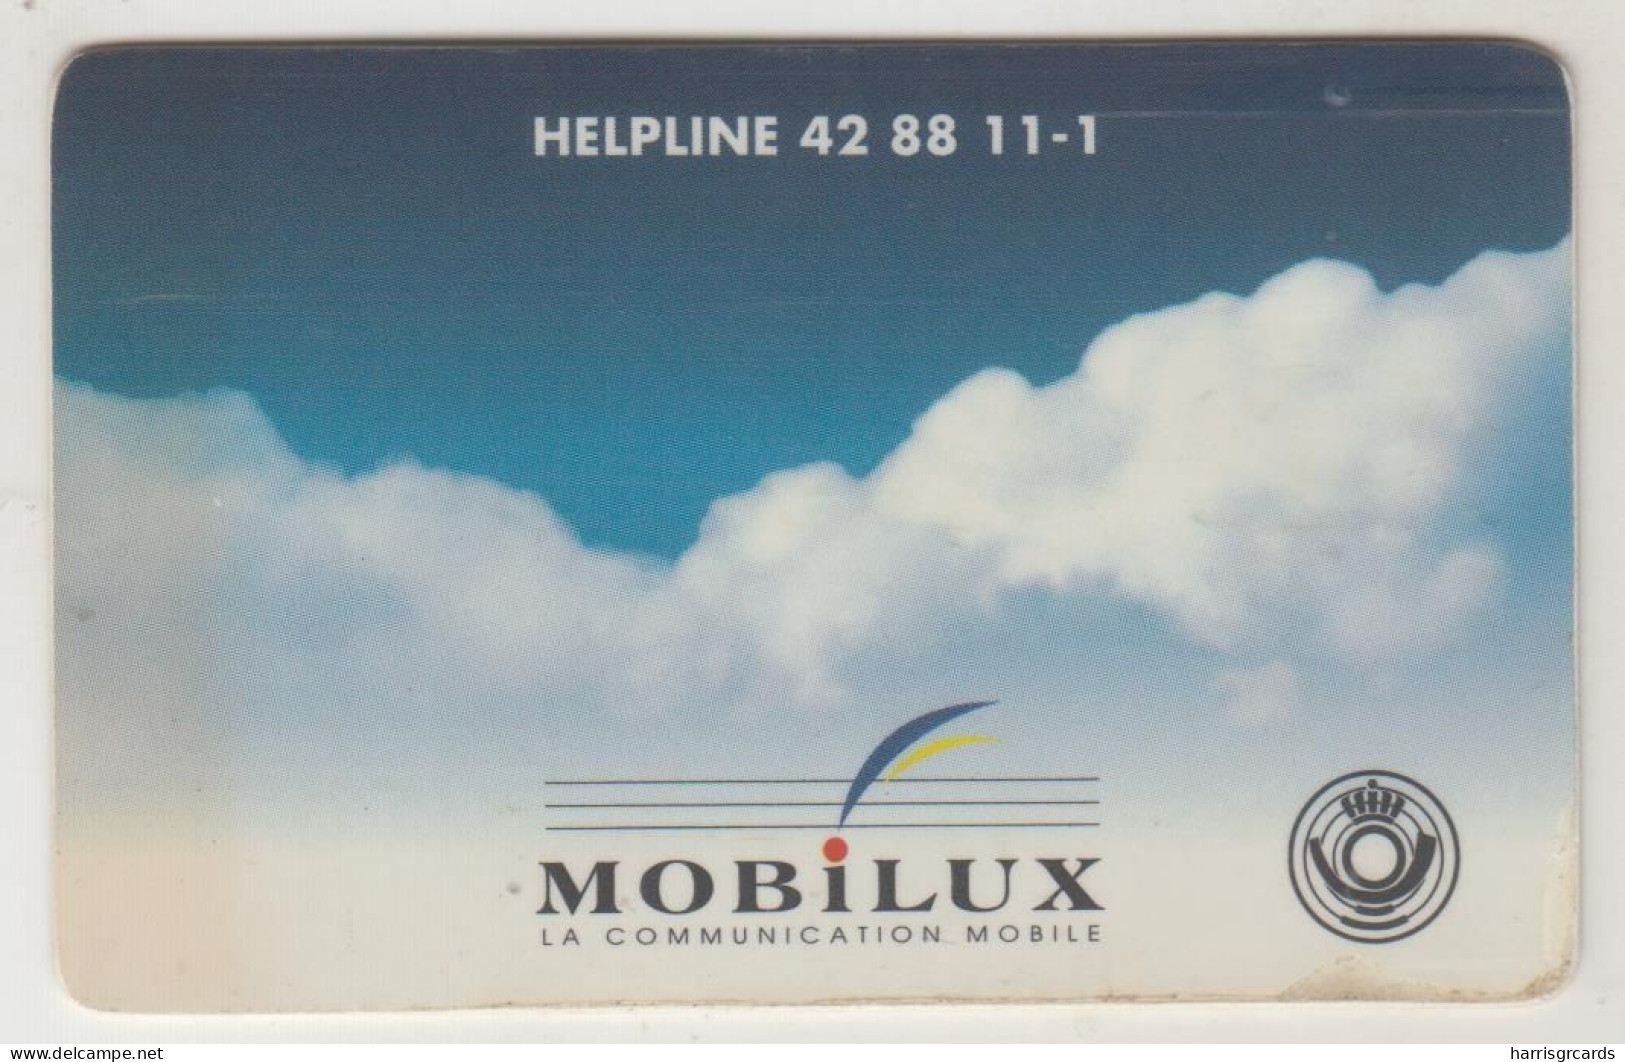 LUXEMBOURG - LUX GSM - Reverse "Mobilux Helpline 42 88 1-1" GSM Card, Used - Luxemburgo